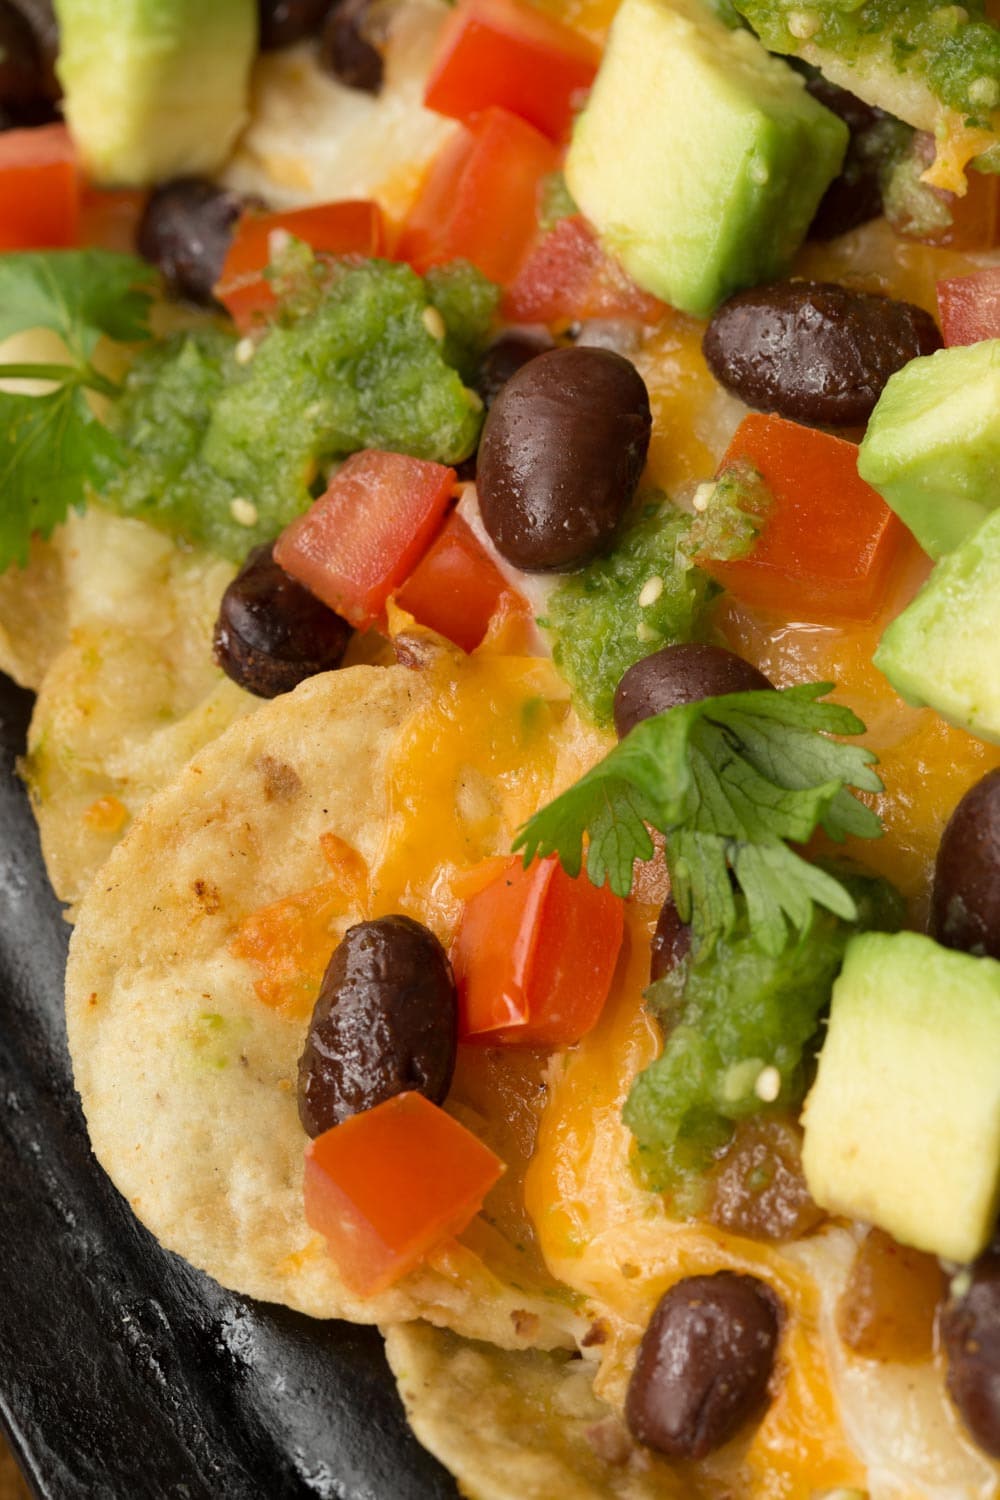 Extreme closeup overhead photo of Black Bean Nachos with Salsa Verde garnished with cilantro and sliced avocados.